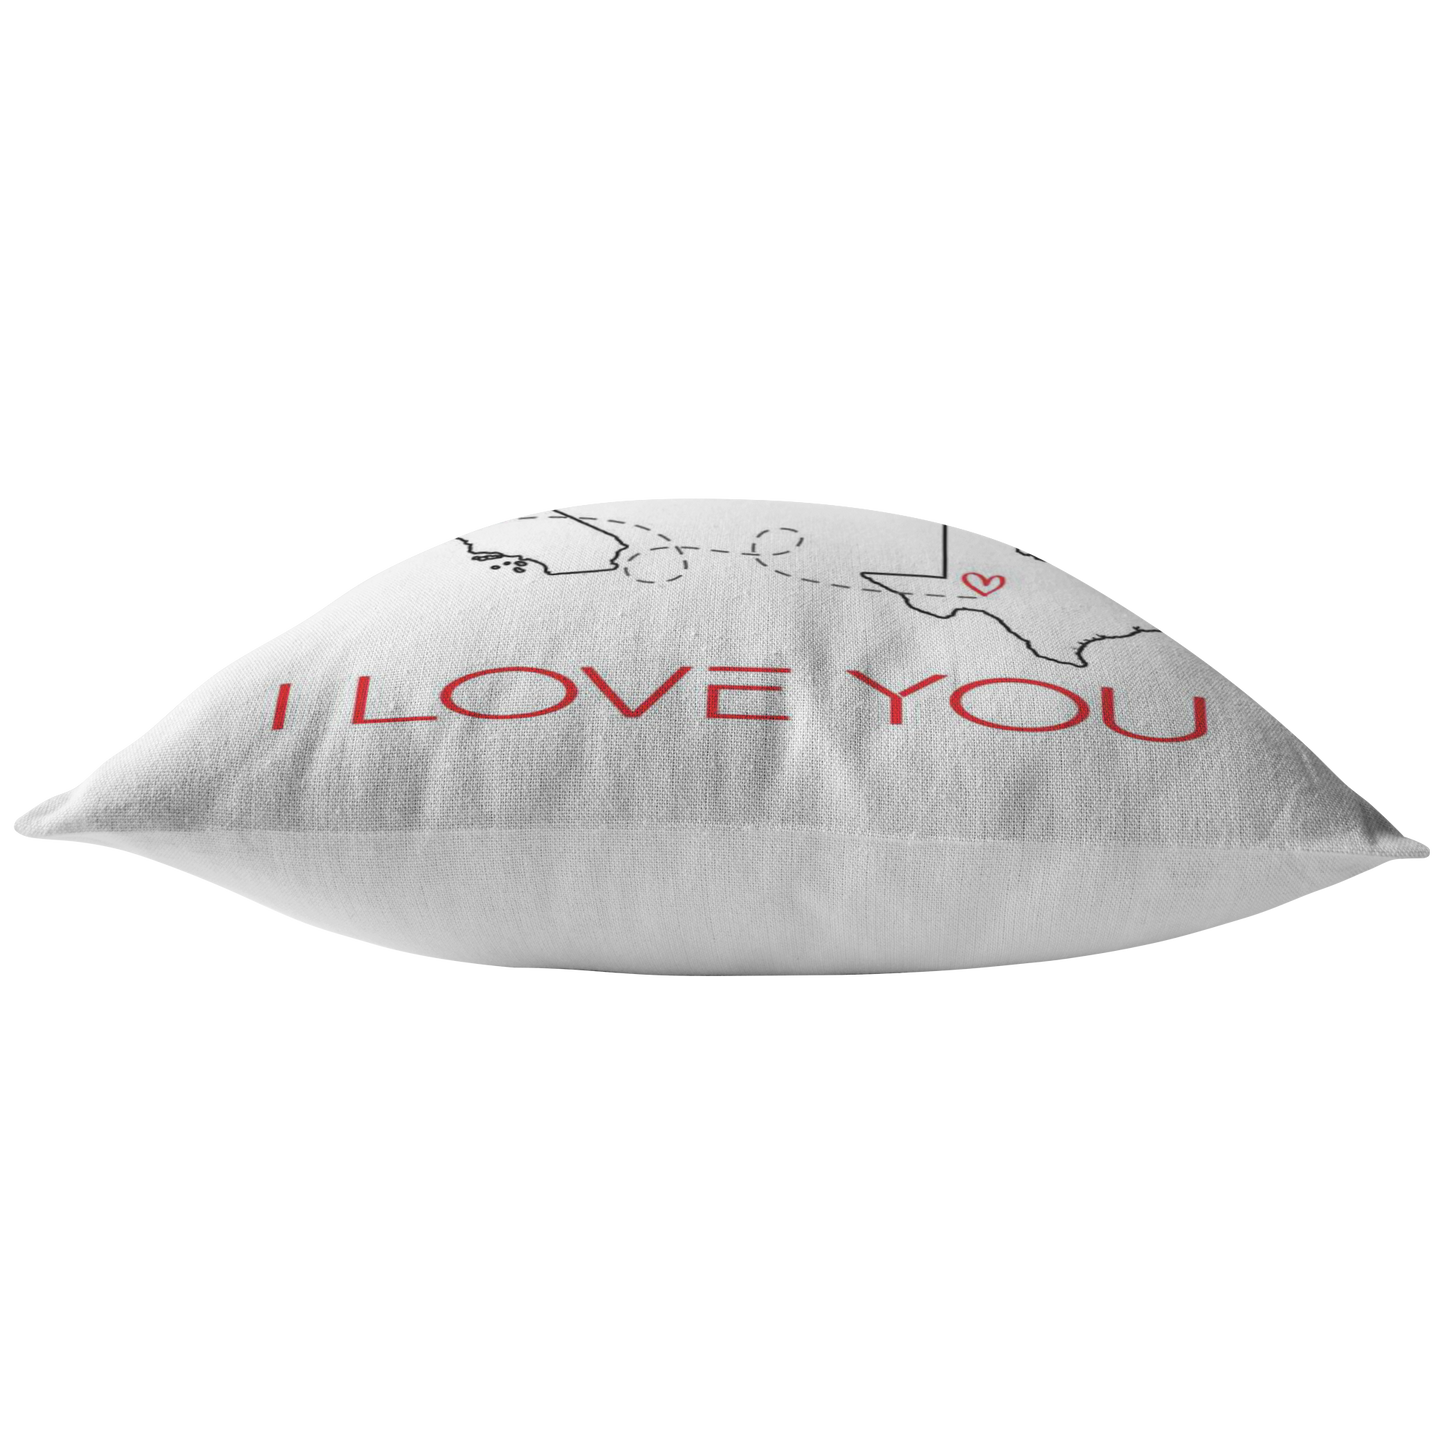 ND-pl20419438-sp-39346 - [ California | Texas | Mother And Son ] (PI_ThrowPillowCovers) Happy Decoration Personalized - The Love Between Mother/Fath